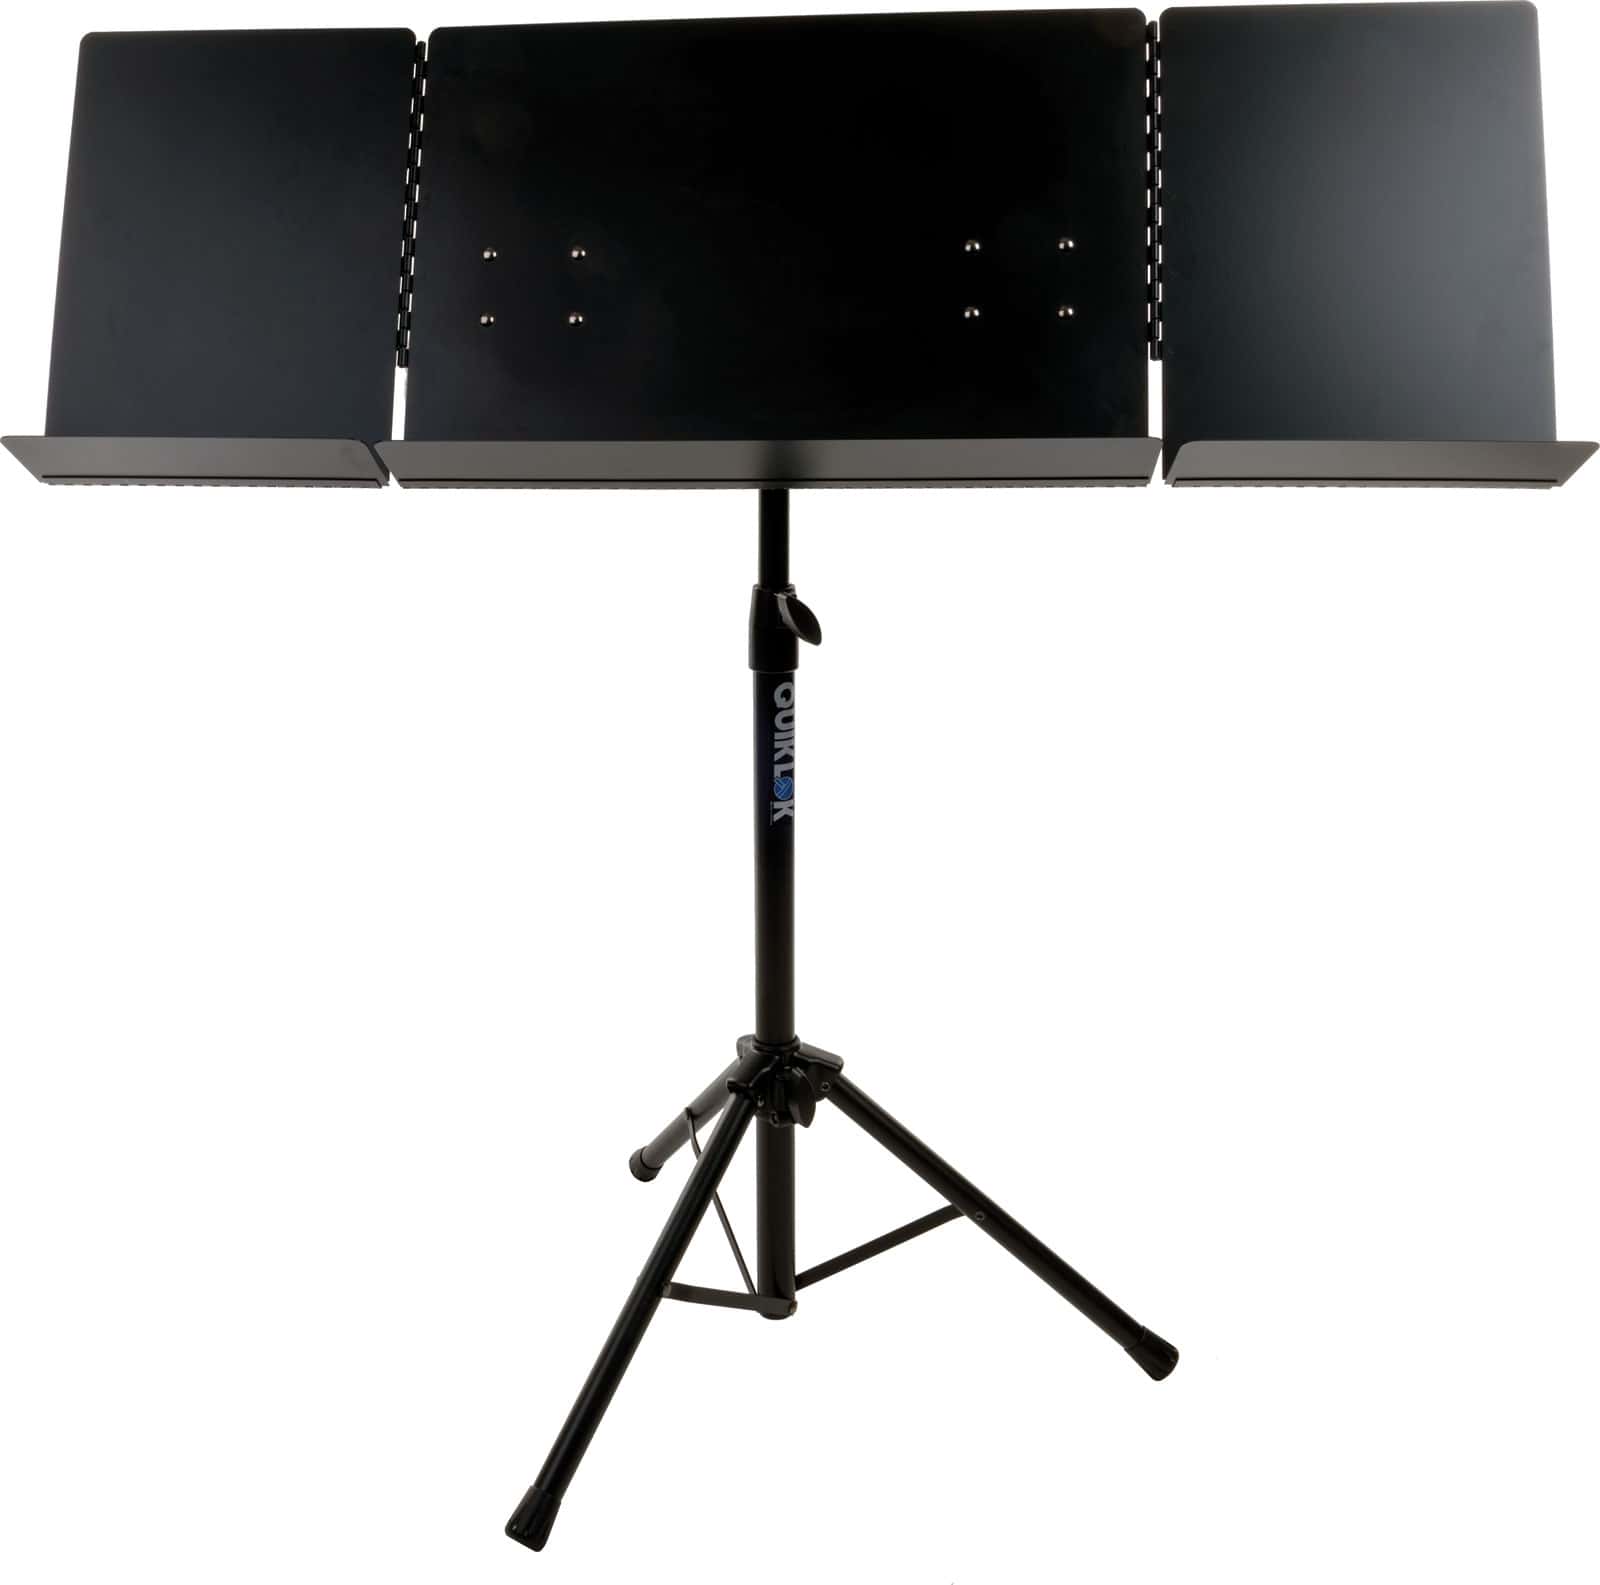 QUIKLOK MS320 ORCHESTRA STAND 3 PAGES BLACK